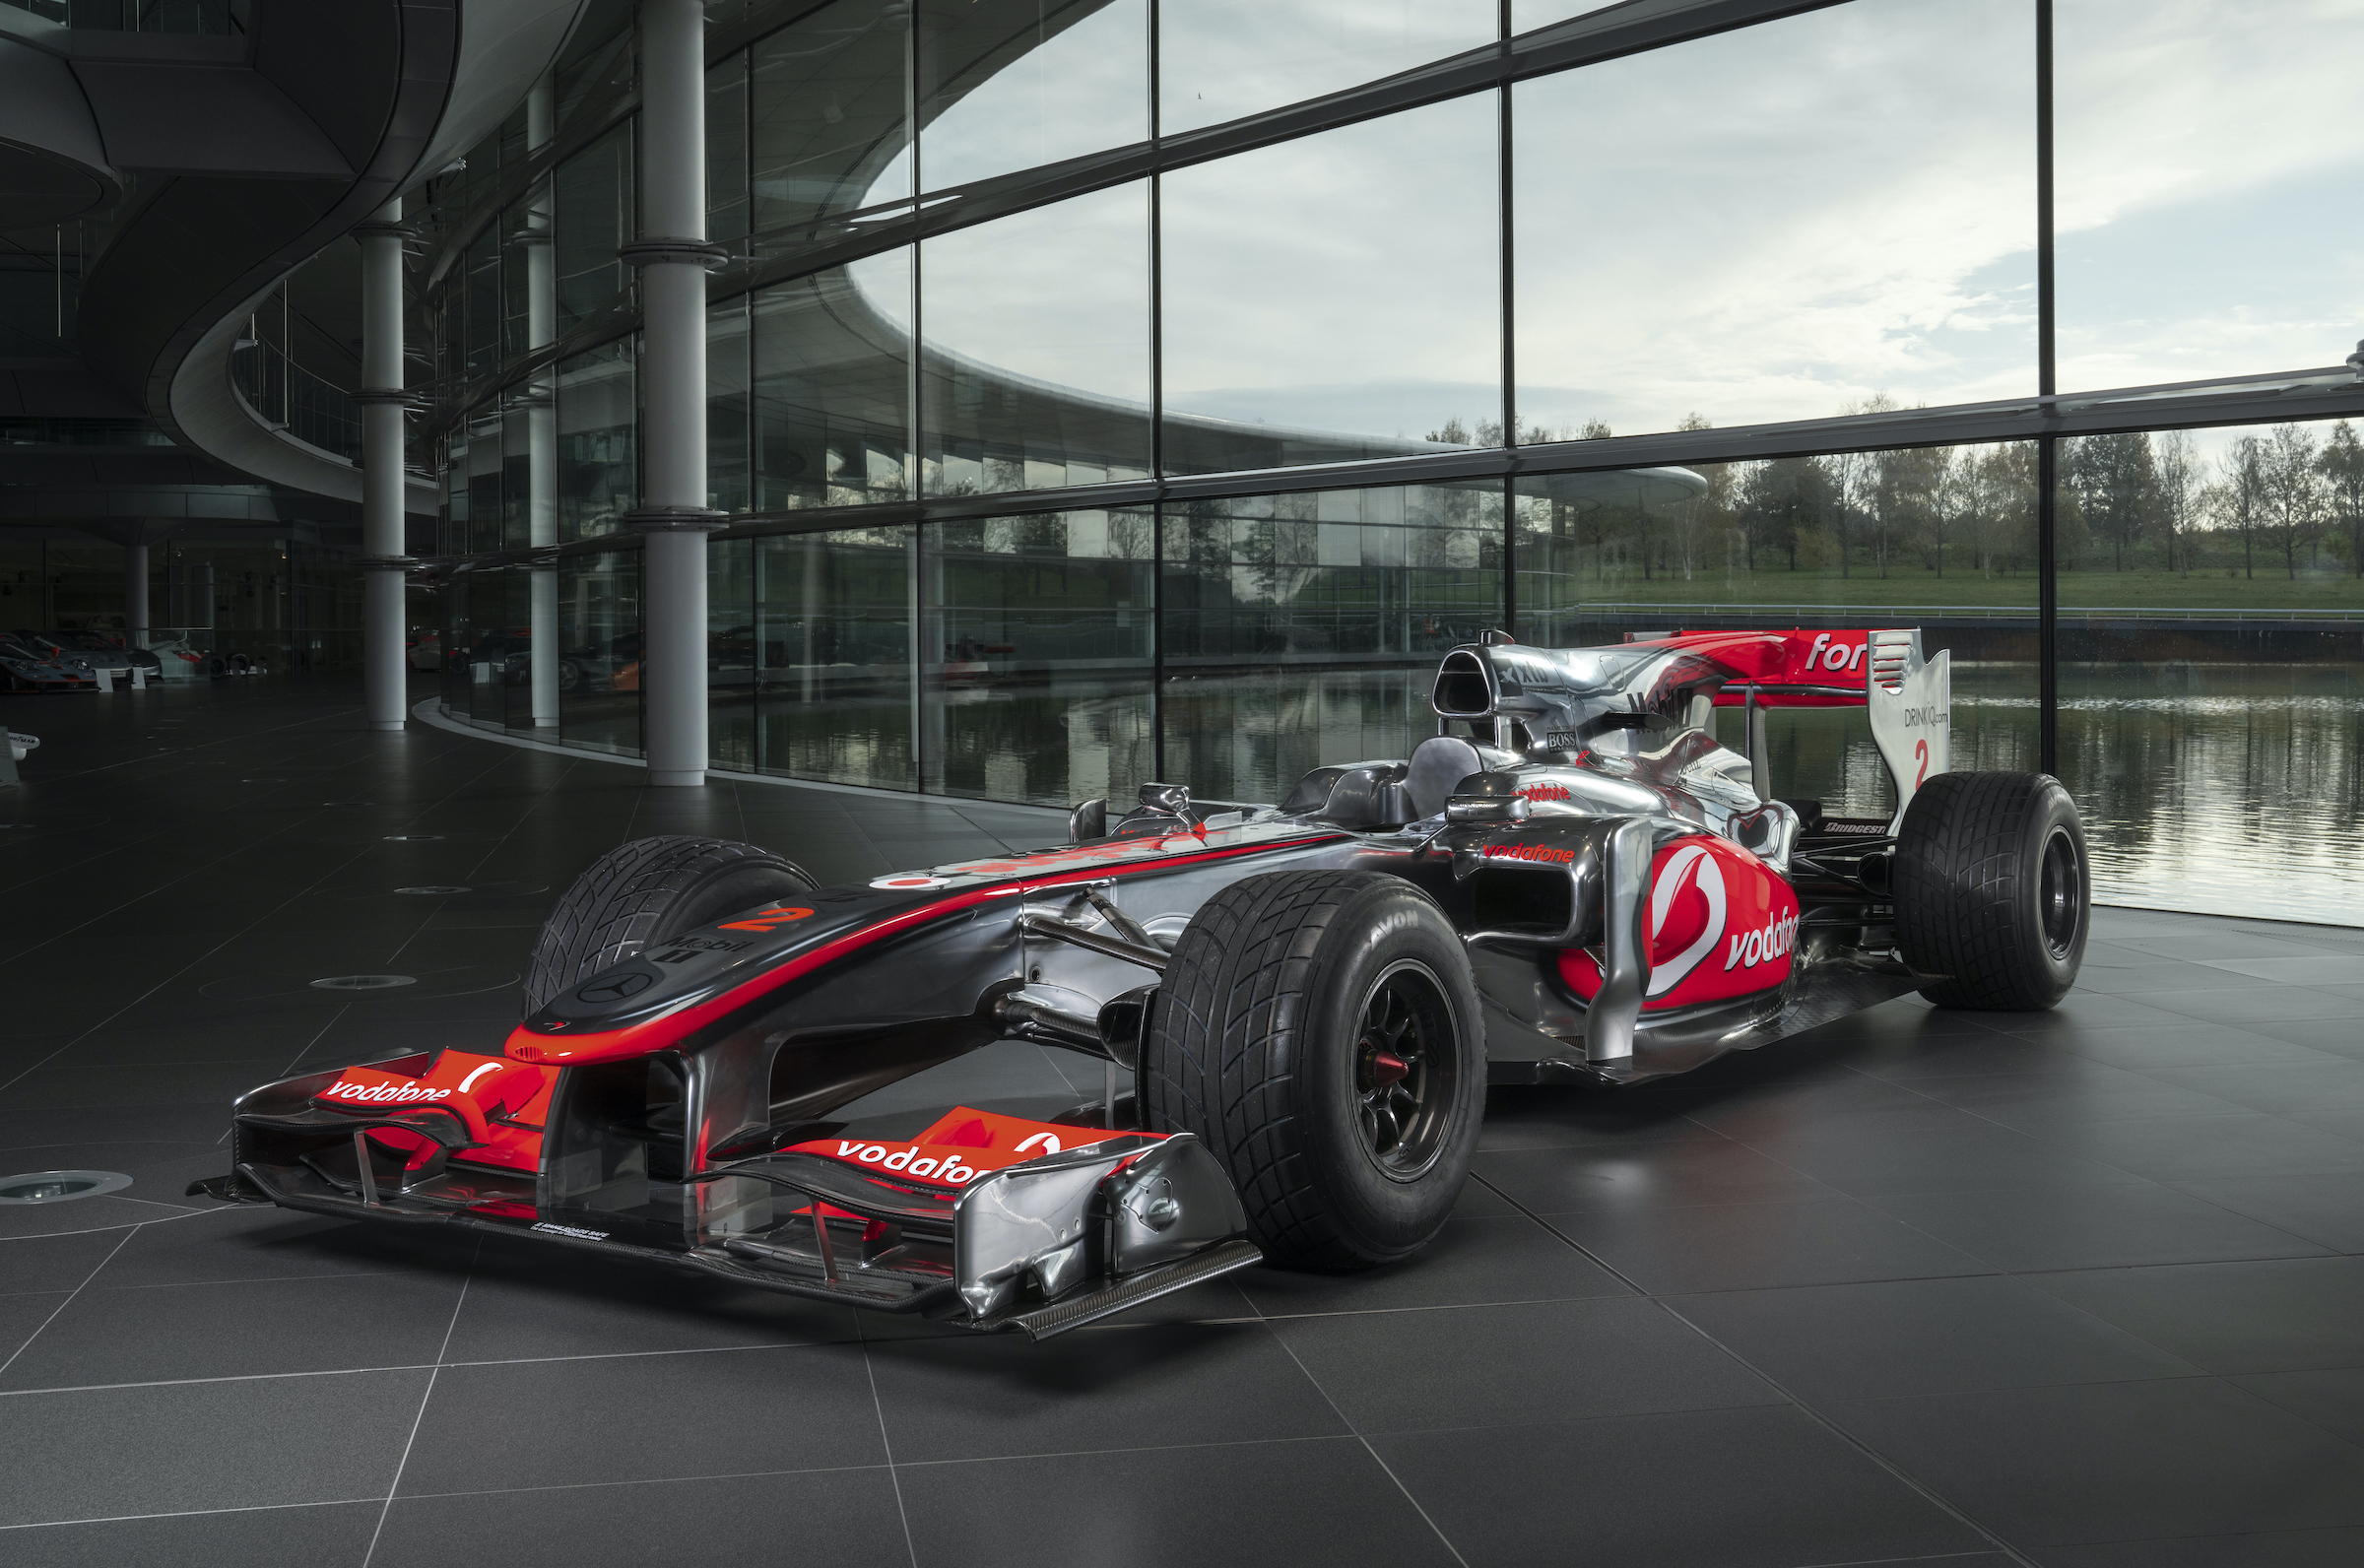 Get in there, Lewis: Hamilton’s race-winning F1 McLaren up for auction